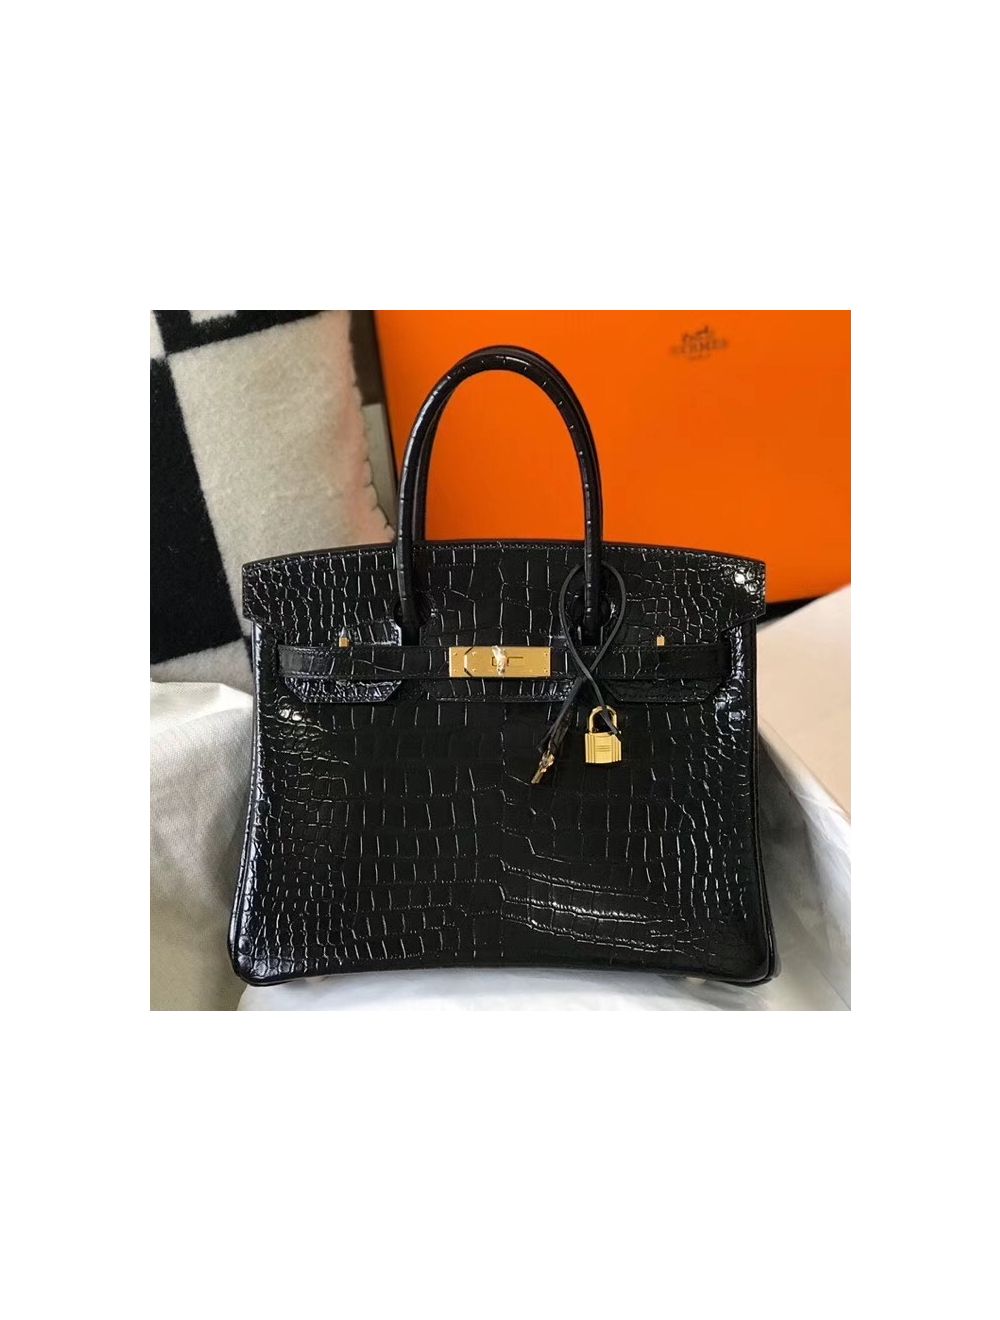 EJ Johnson Spotted Shopping in LA Wearing an All Black Leather Look With an Black  Crocodile Hermes Birkin Bag – Fashion Bomb Daily